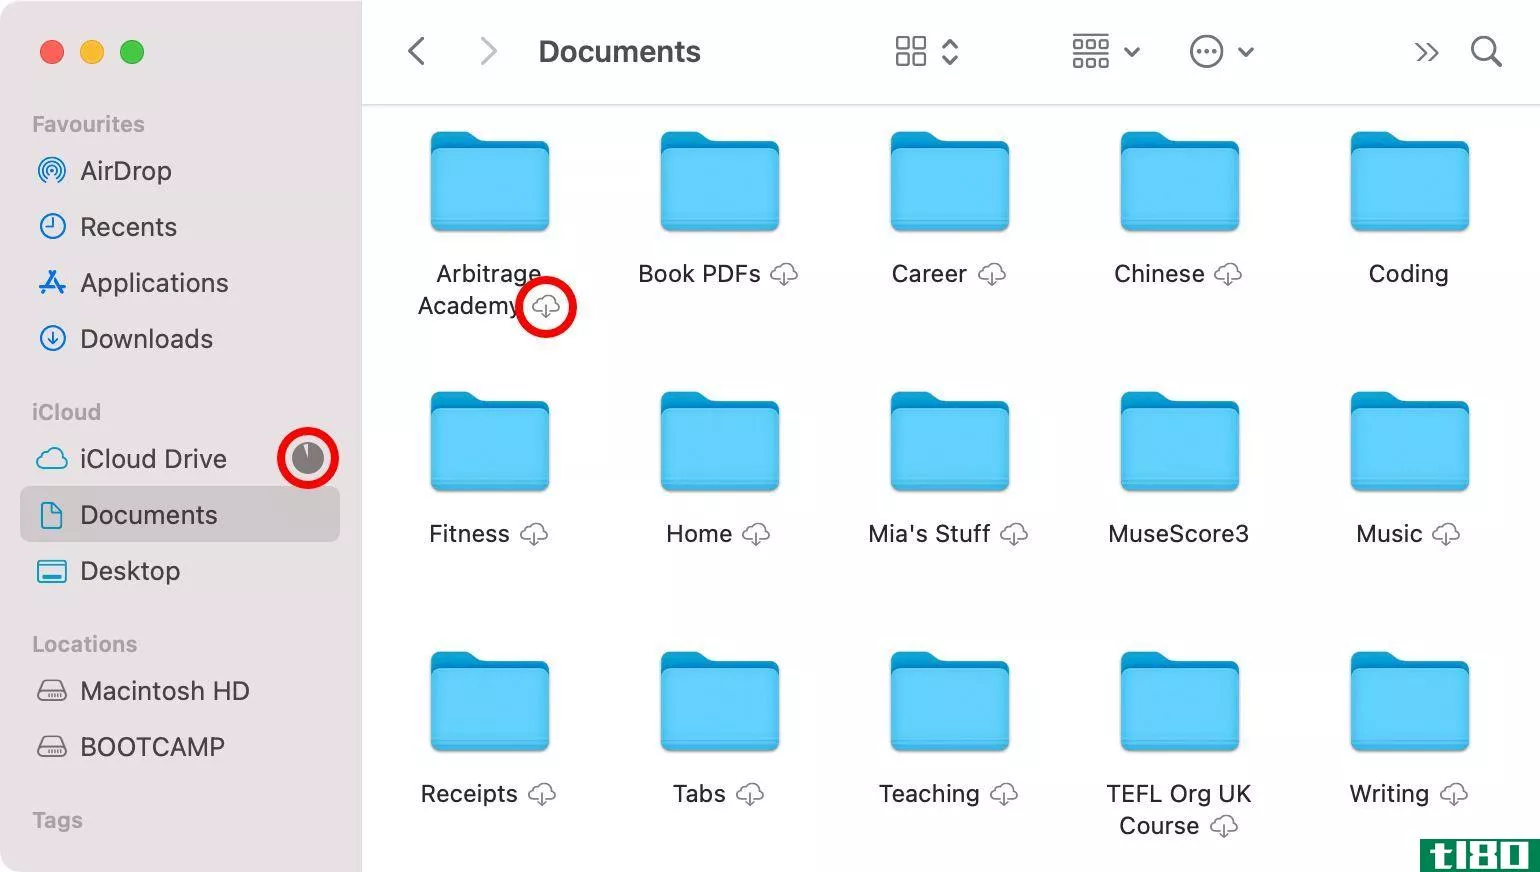 iCloud Drive download icon and loading circle in Finder